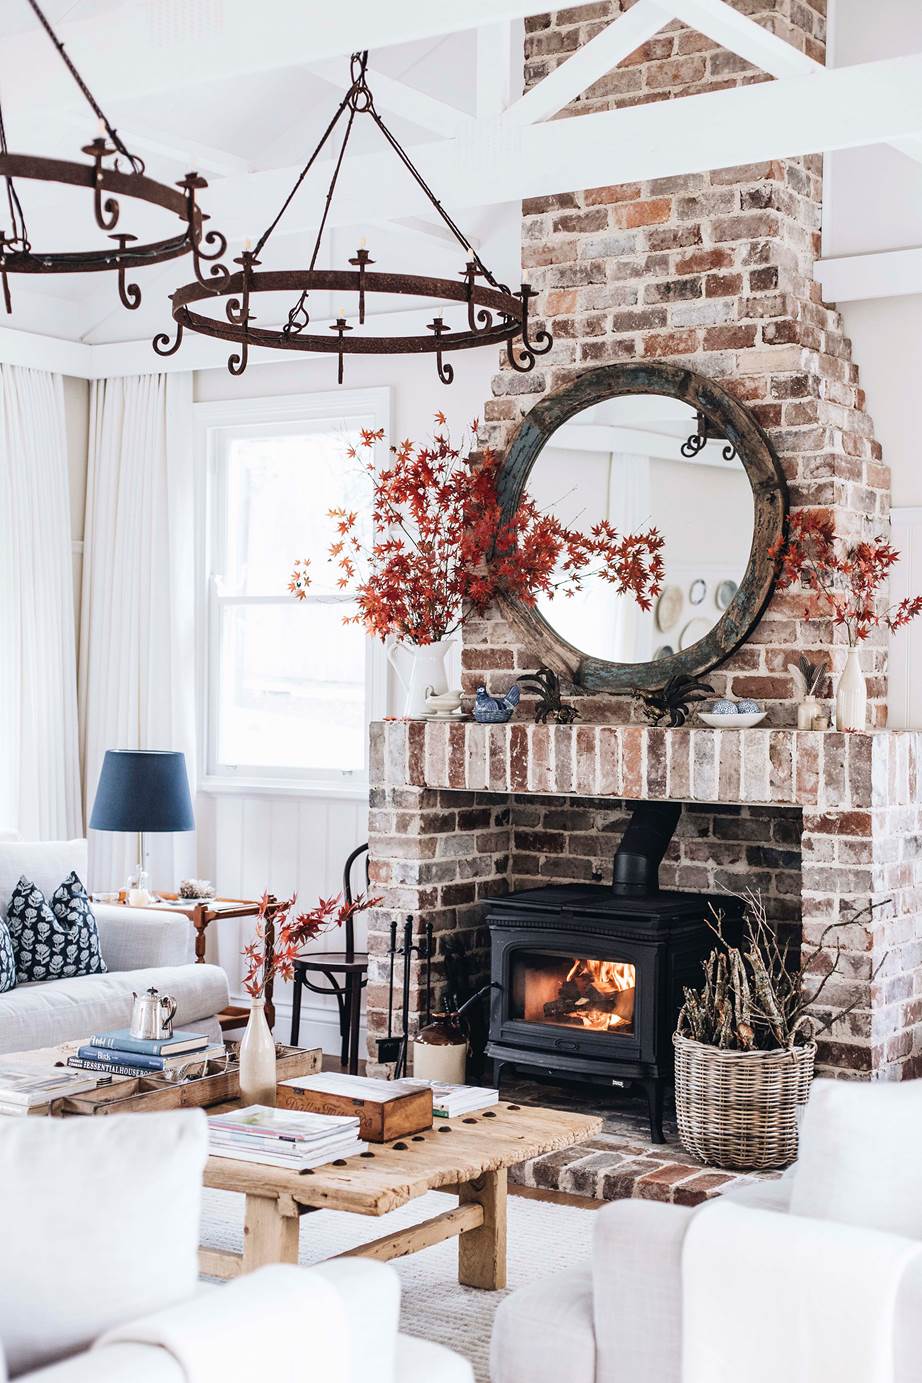 Best Farmhouse Living Rooms for 2023; here are some of the best farmhouse living room designs we will see more of in the coming year!